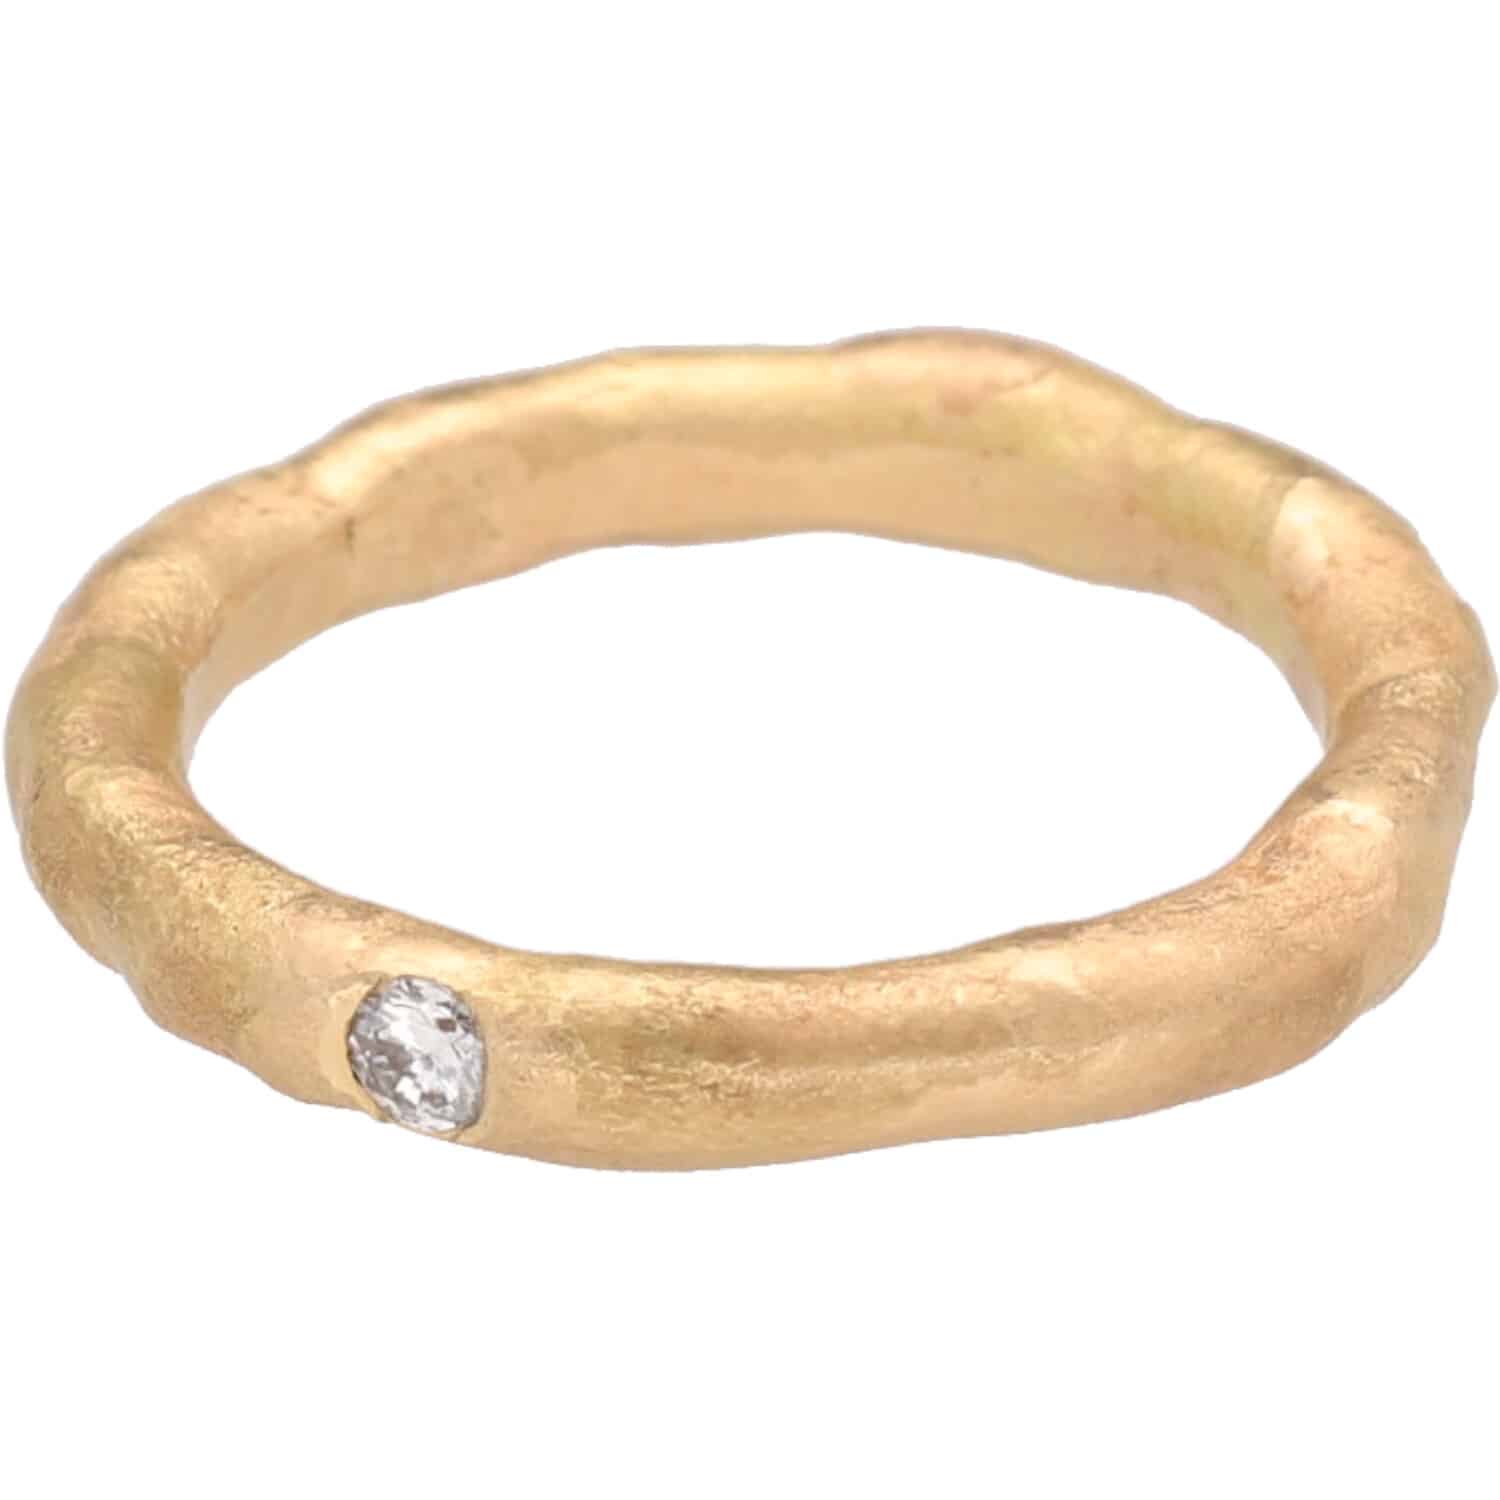 Sulimana Ring